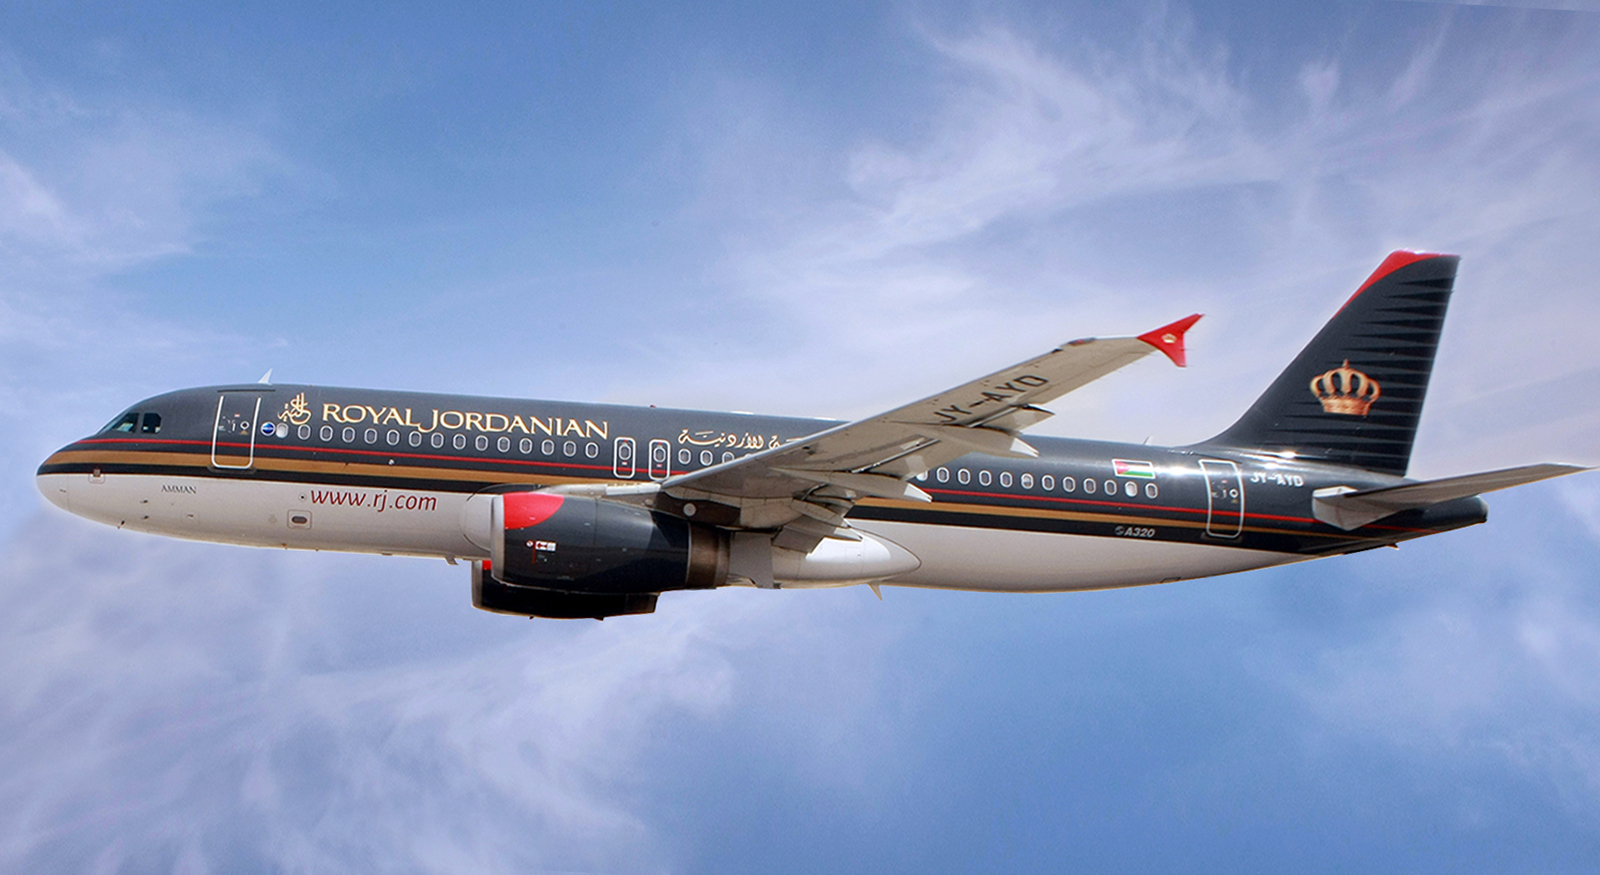 Hawker Pacific provides Royal Jordanian’s Embraer fleet with landing gear services